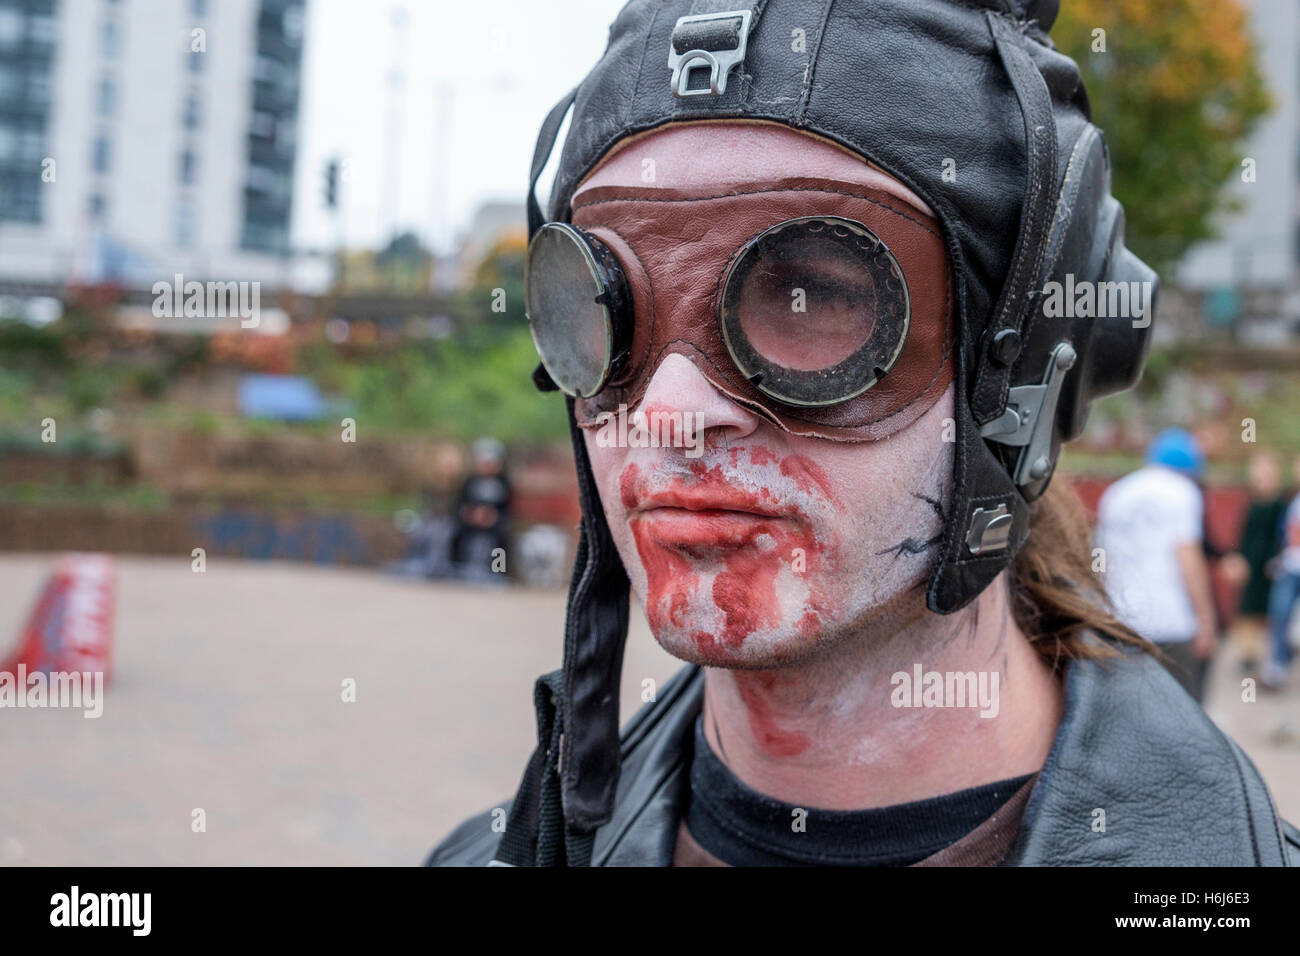 Bristol, UK. 29th Oct, 2016. A man in fancy dress poses for a photograph as he participates in a Zombie Walk In Bristol. Credit:  lynchpics/Alamy Live News Stock Photo